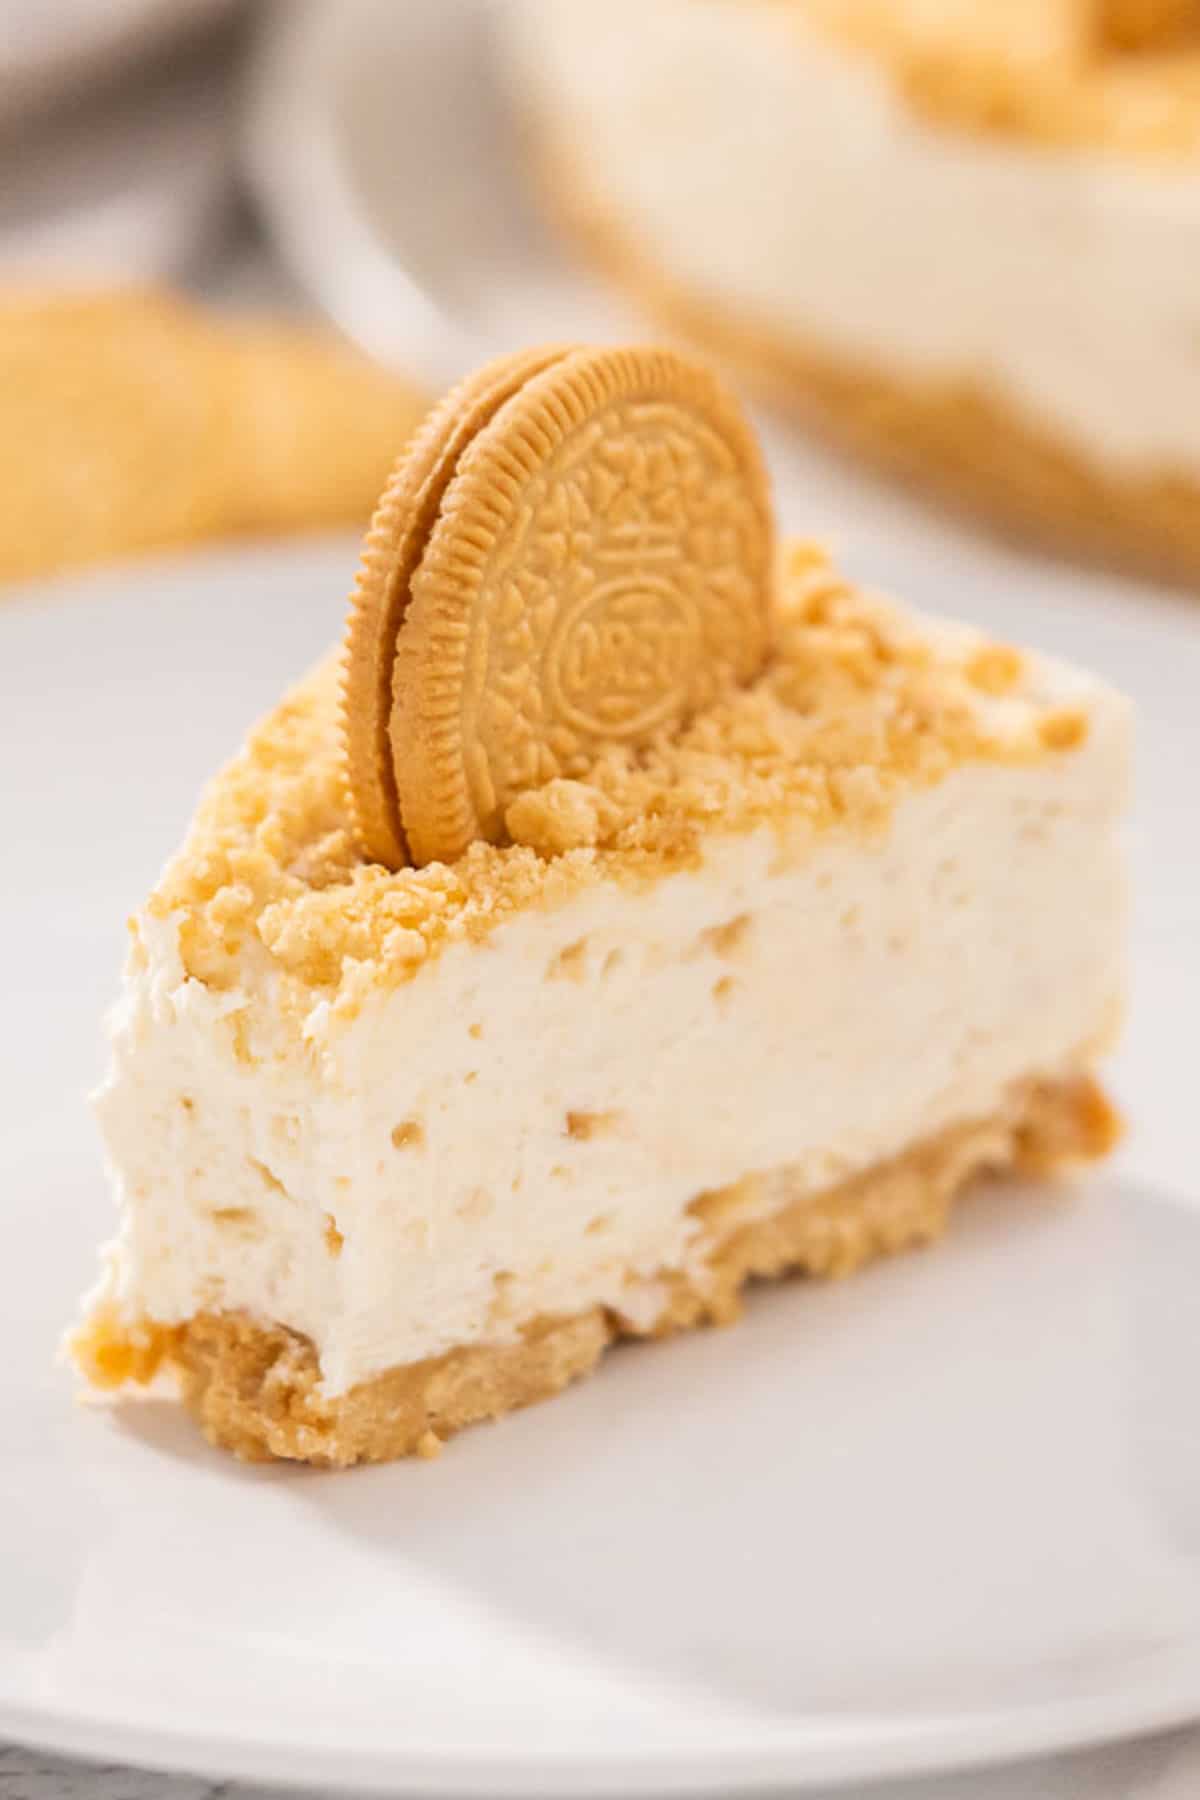 A slice of Golden Oreo Cheesecake with a bite taken out.